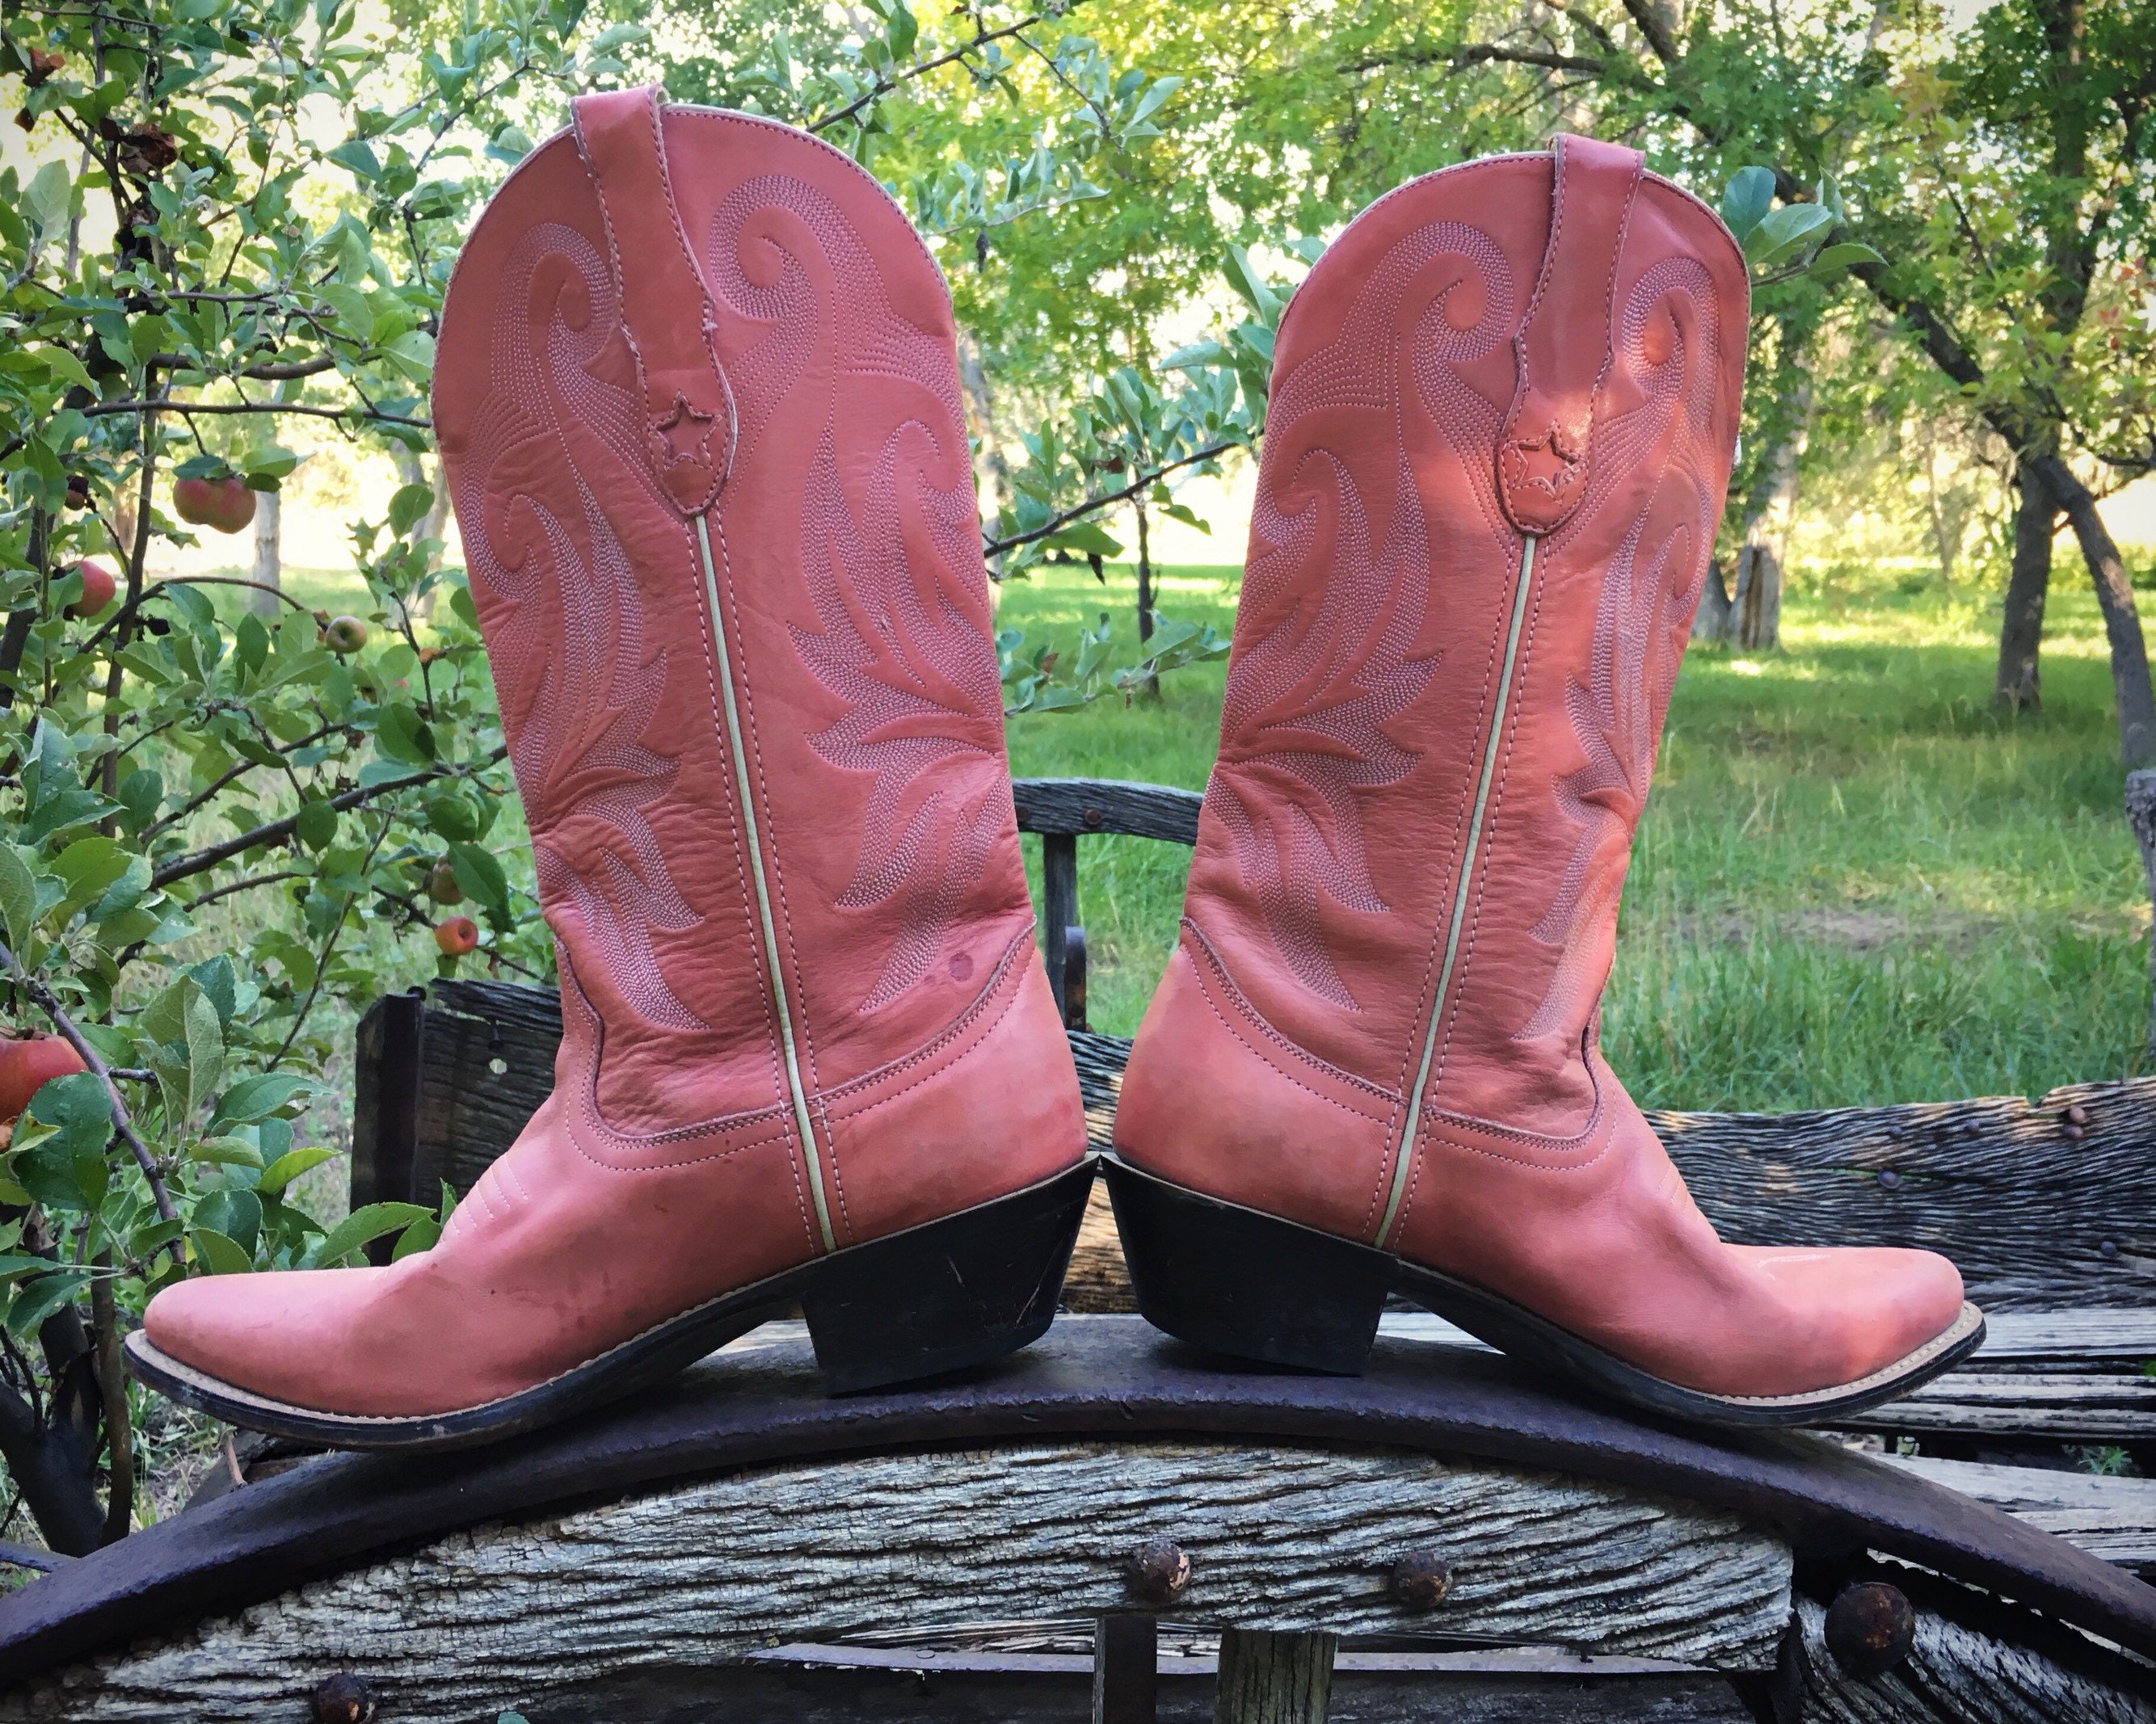 Vintage Distressed Pink Cowboy Boots for Women Size 7 M Western Fashion ...